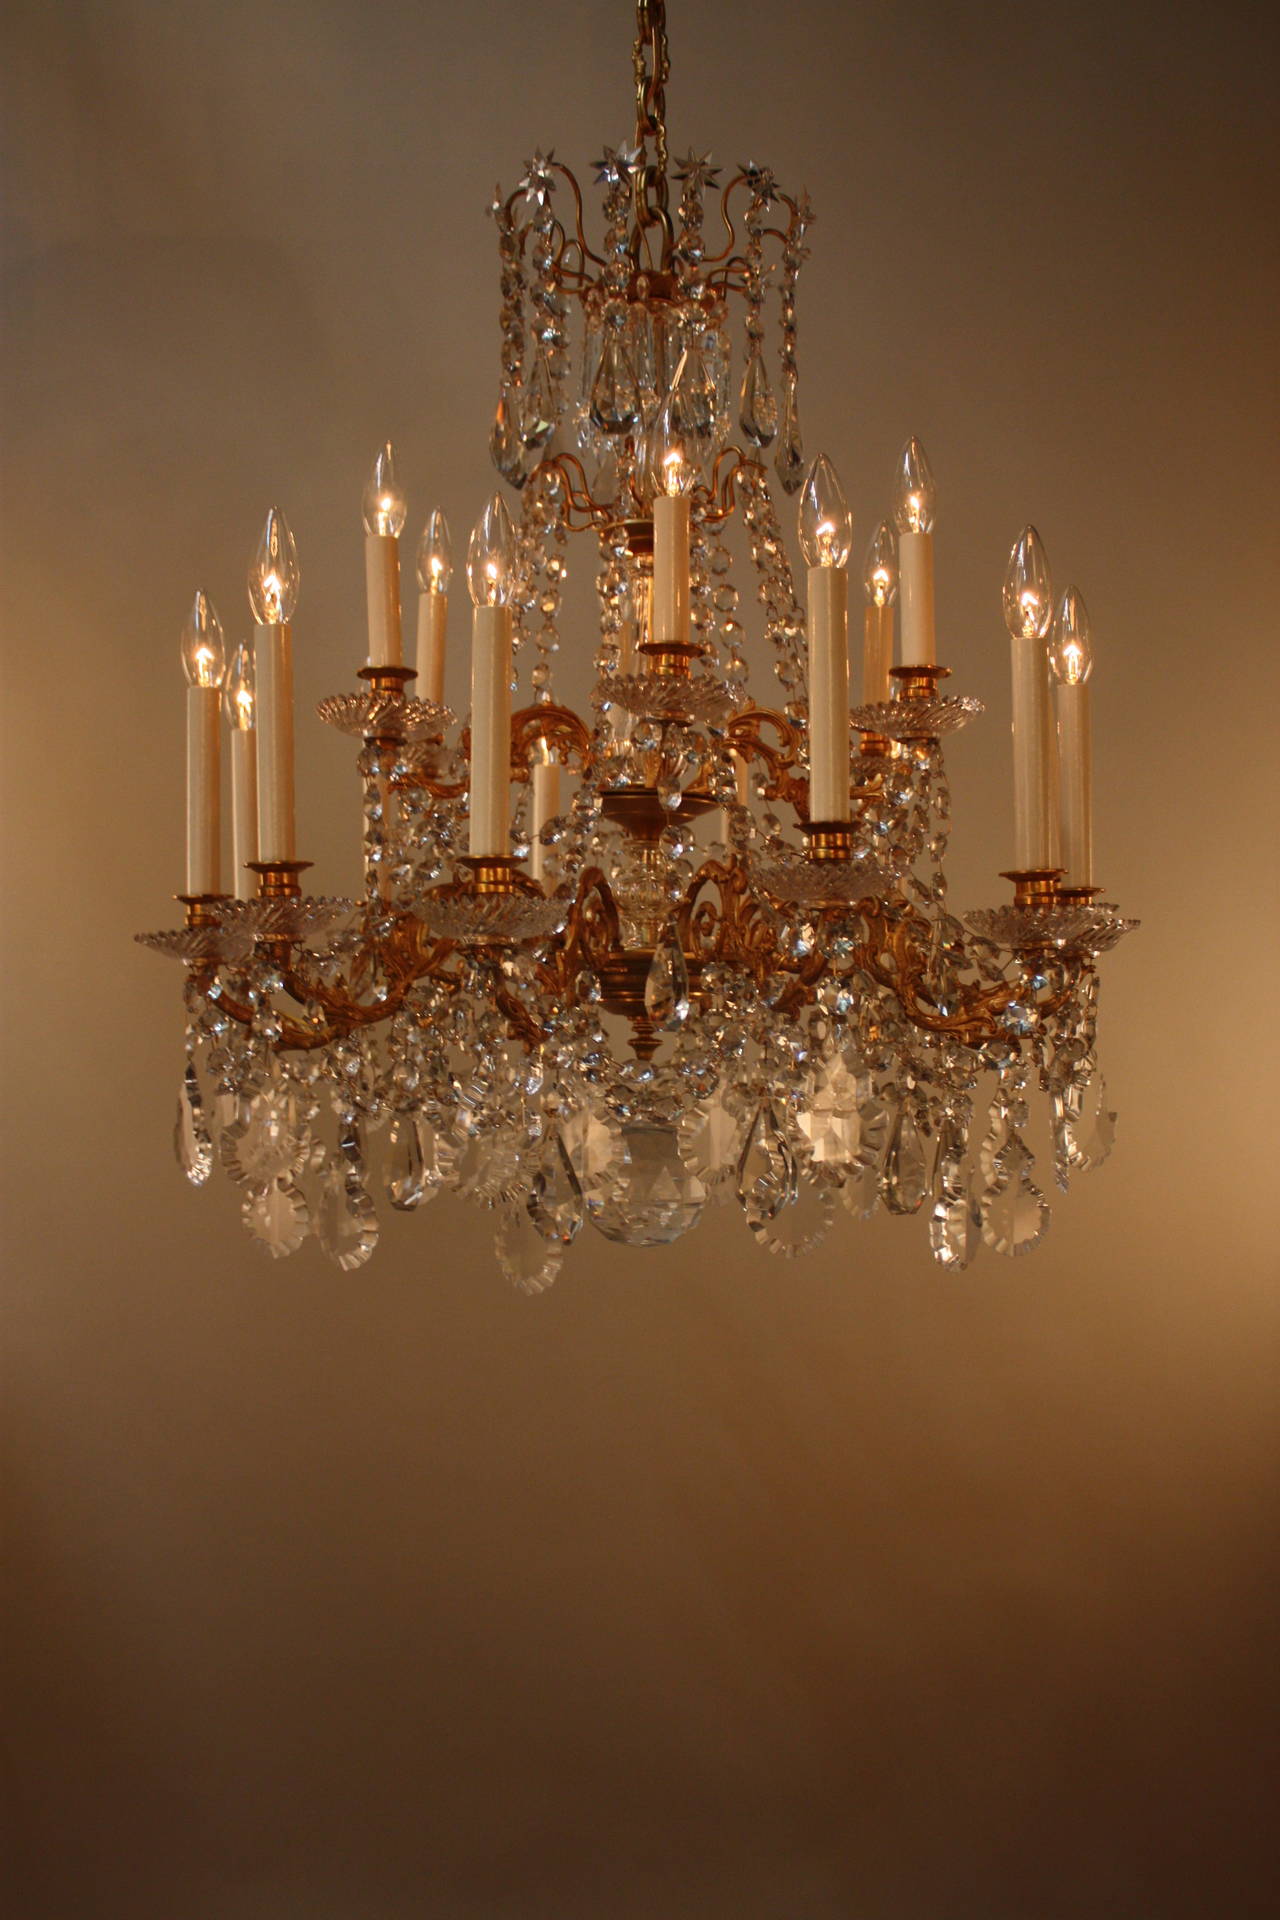 This stunning 19th century chandelier from France is made of beautiful bronze and crystal. With eighteen lights, this fixture is the definition of elegance.